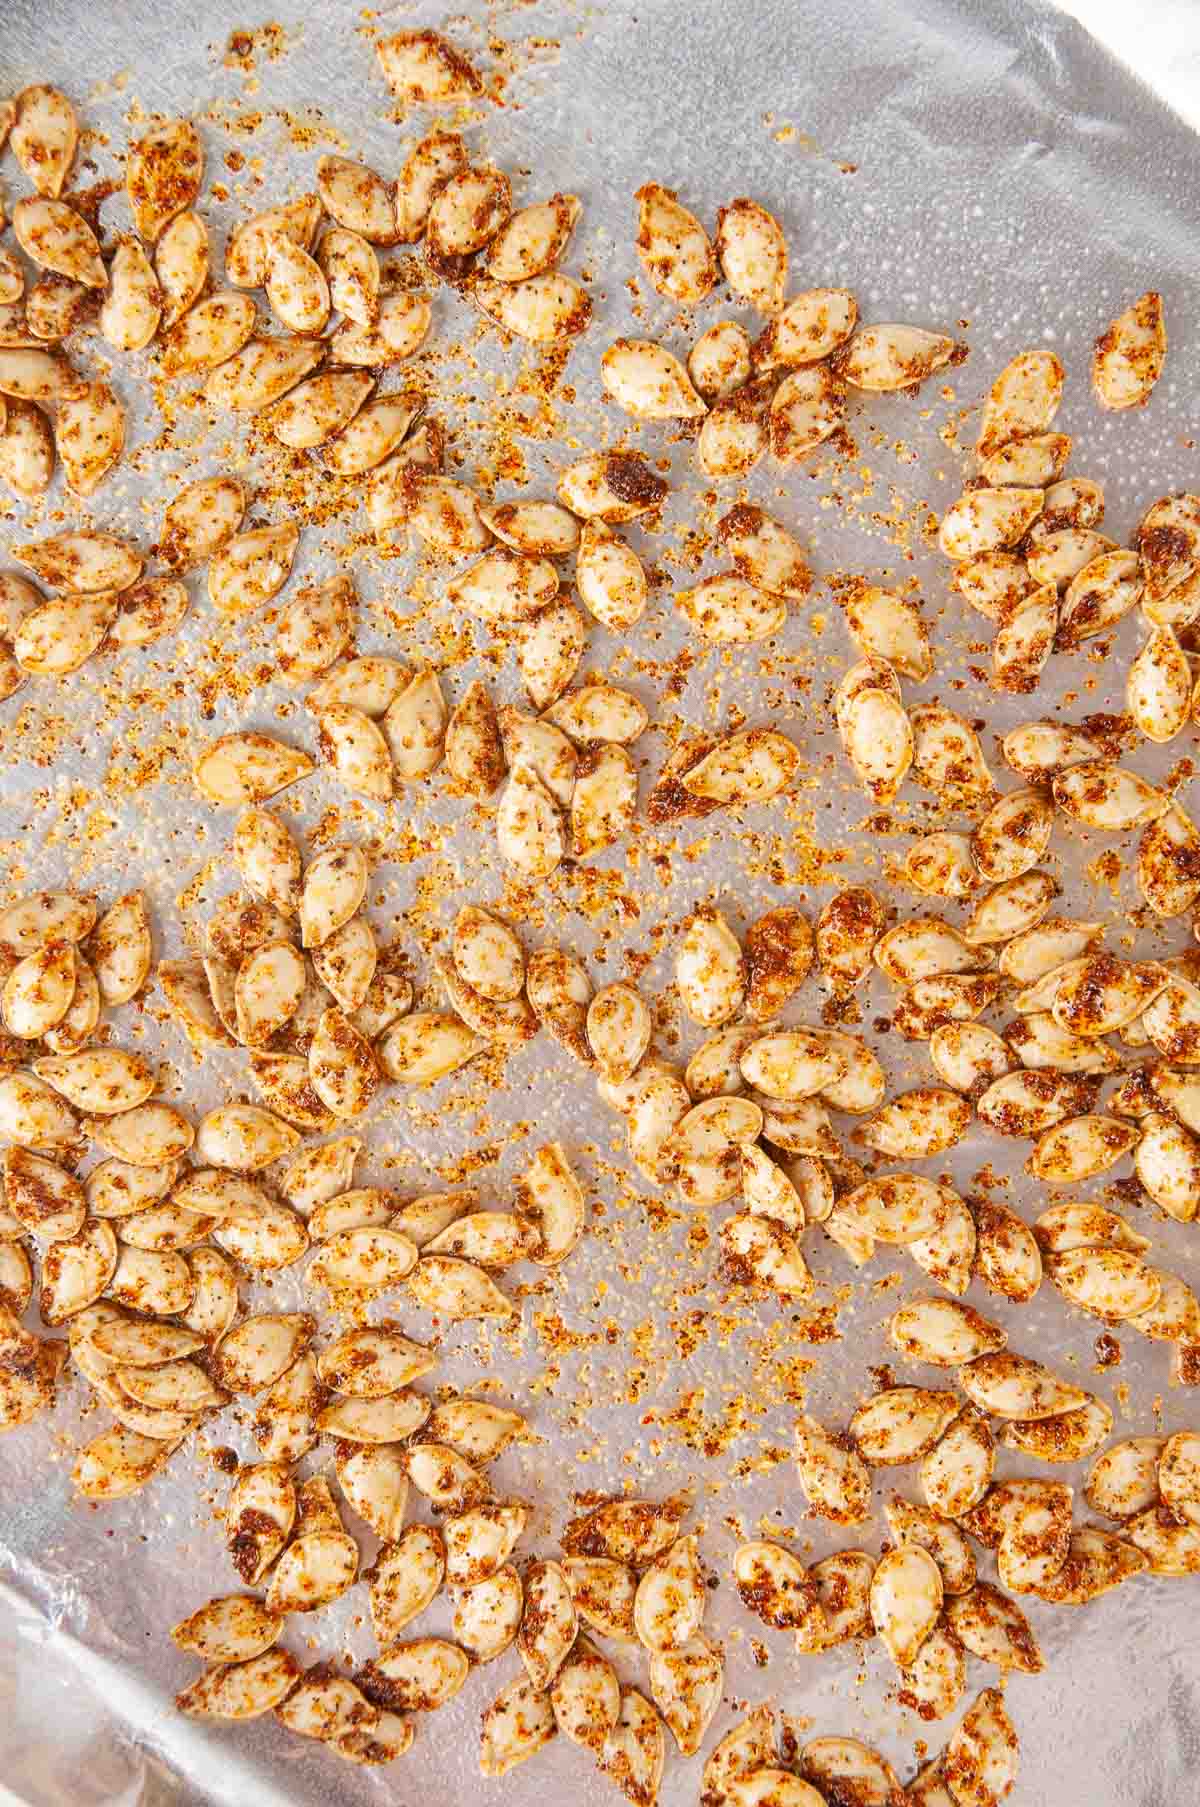 Spread the seasoned seeds out on a baking sheet lined with foil.